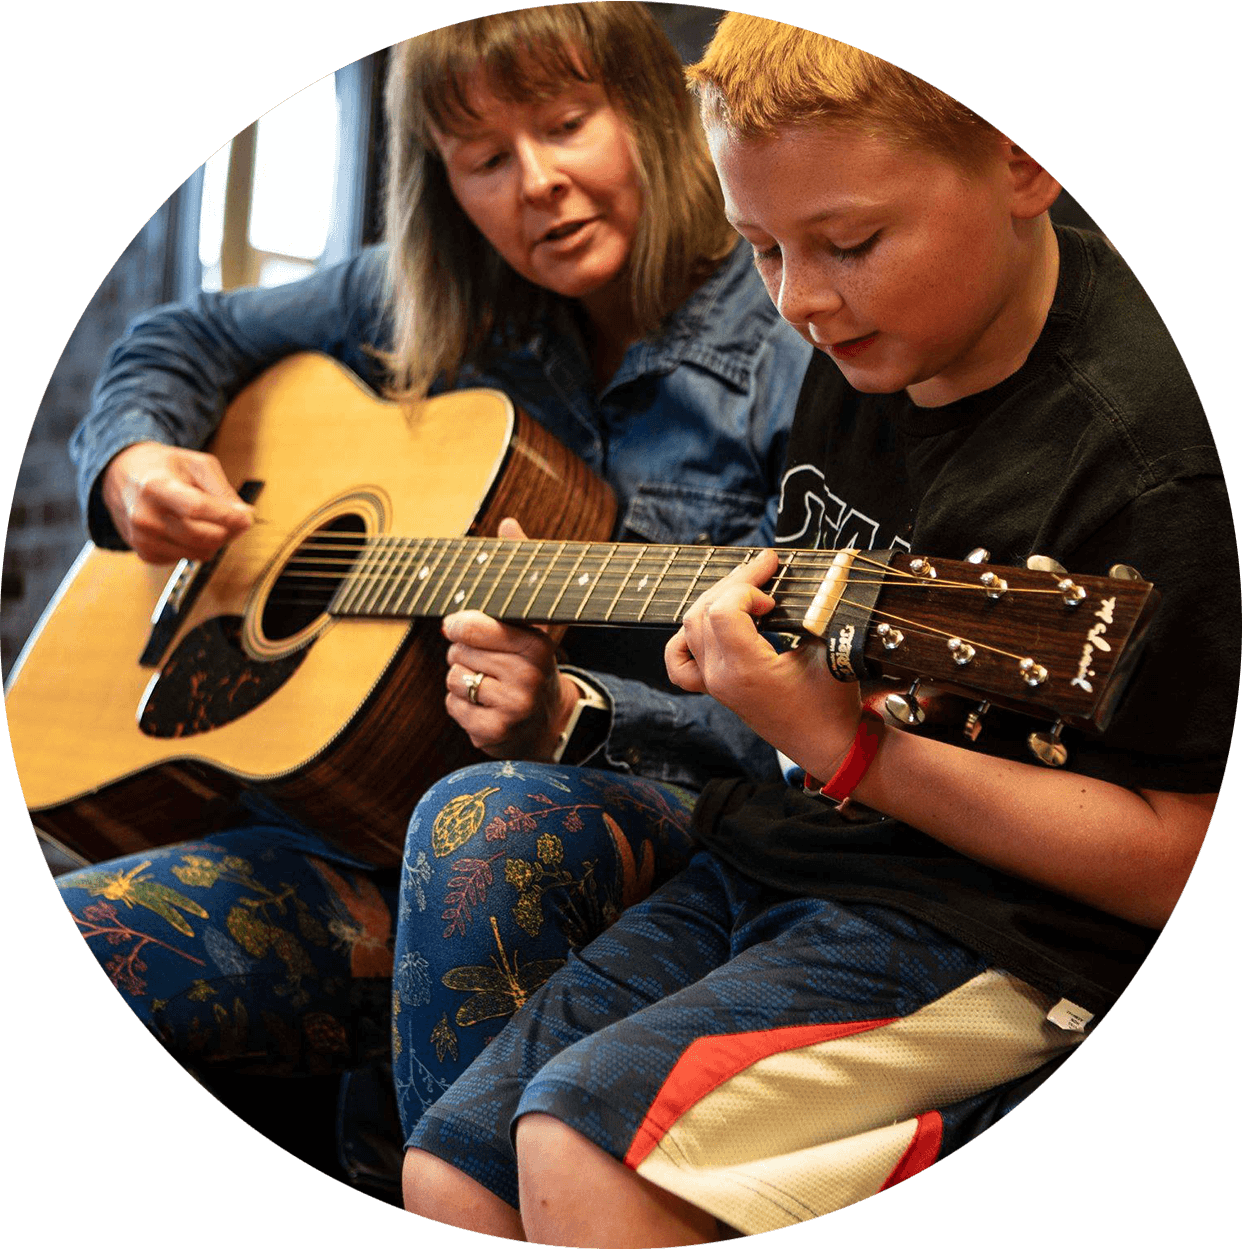 Young boy learning the guitar